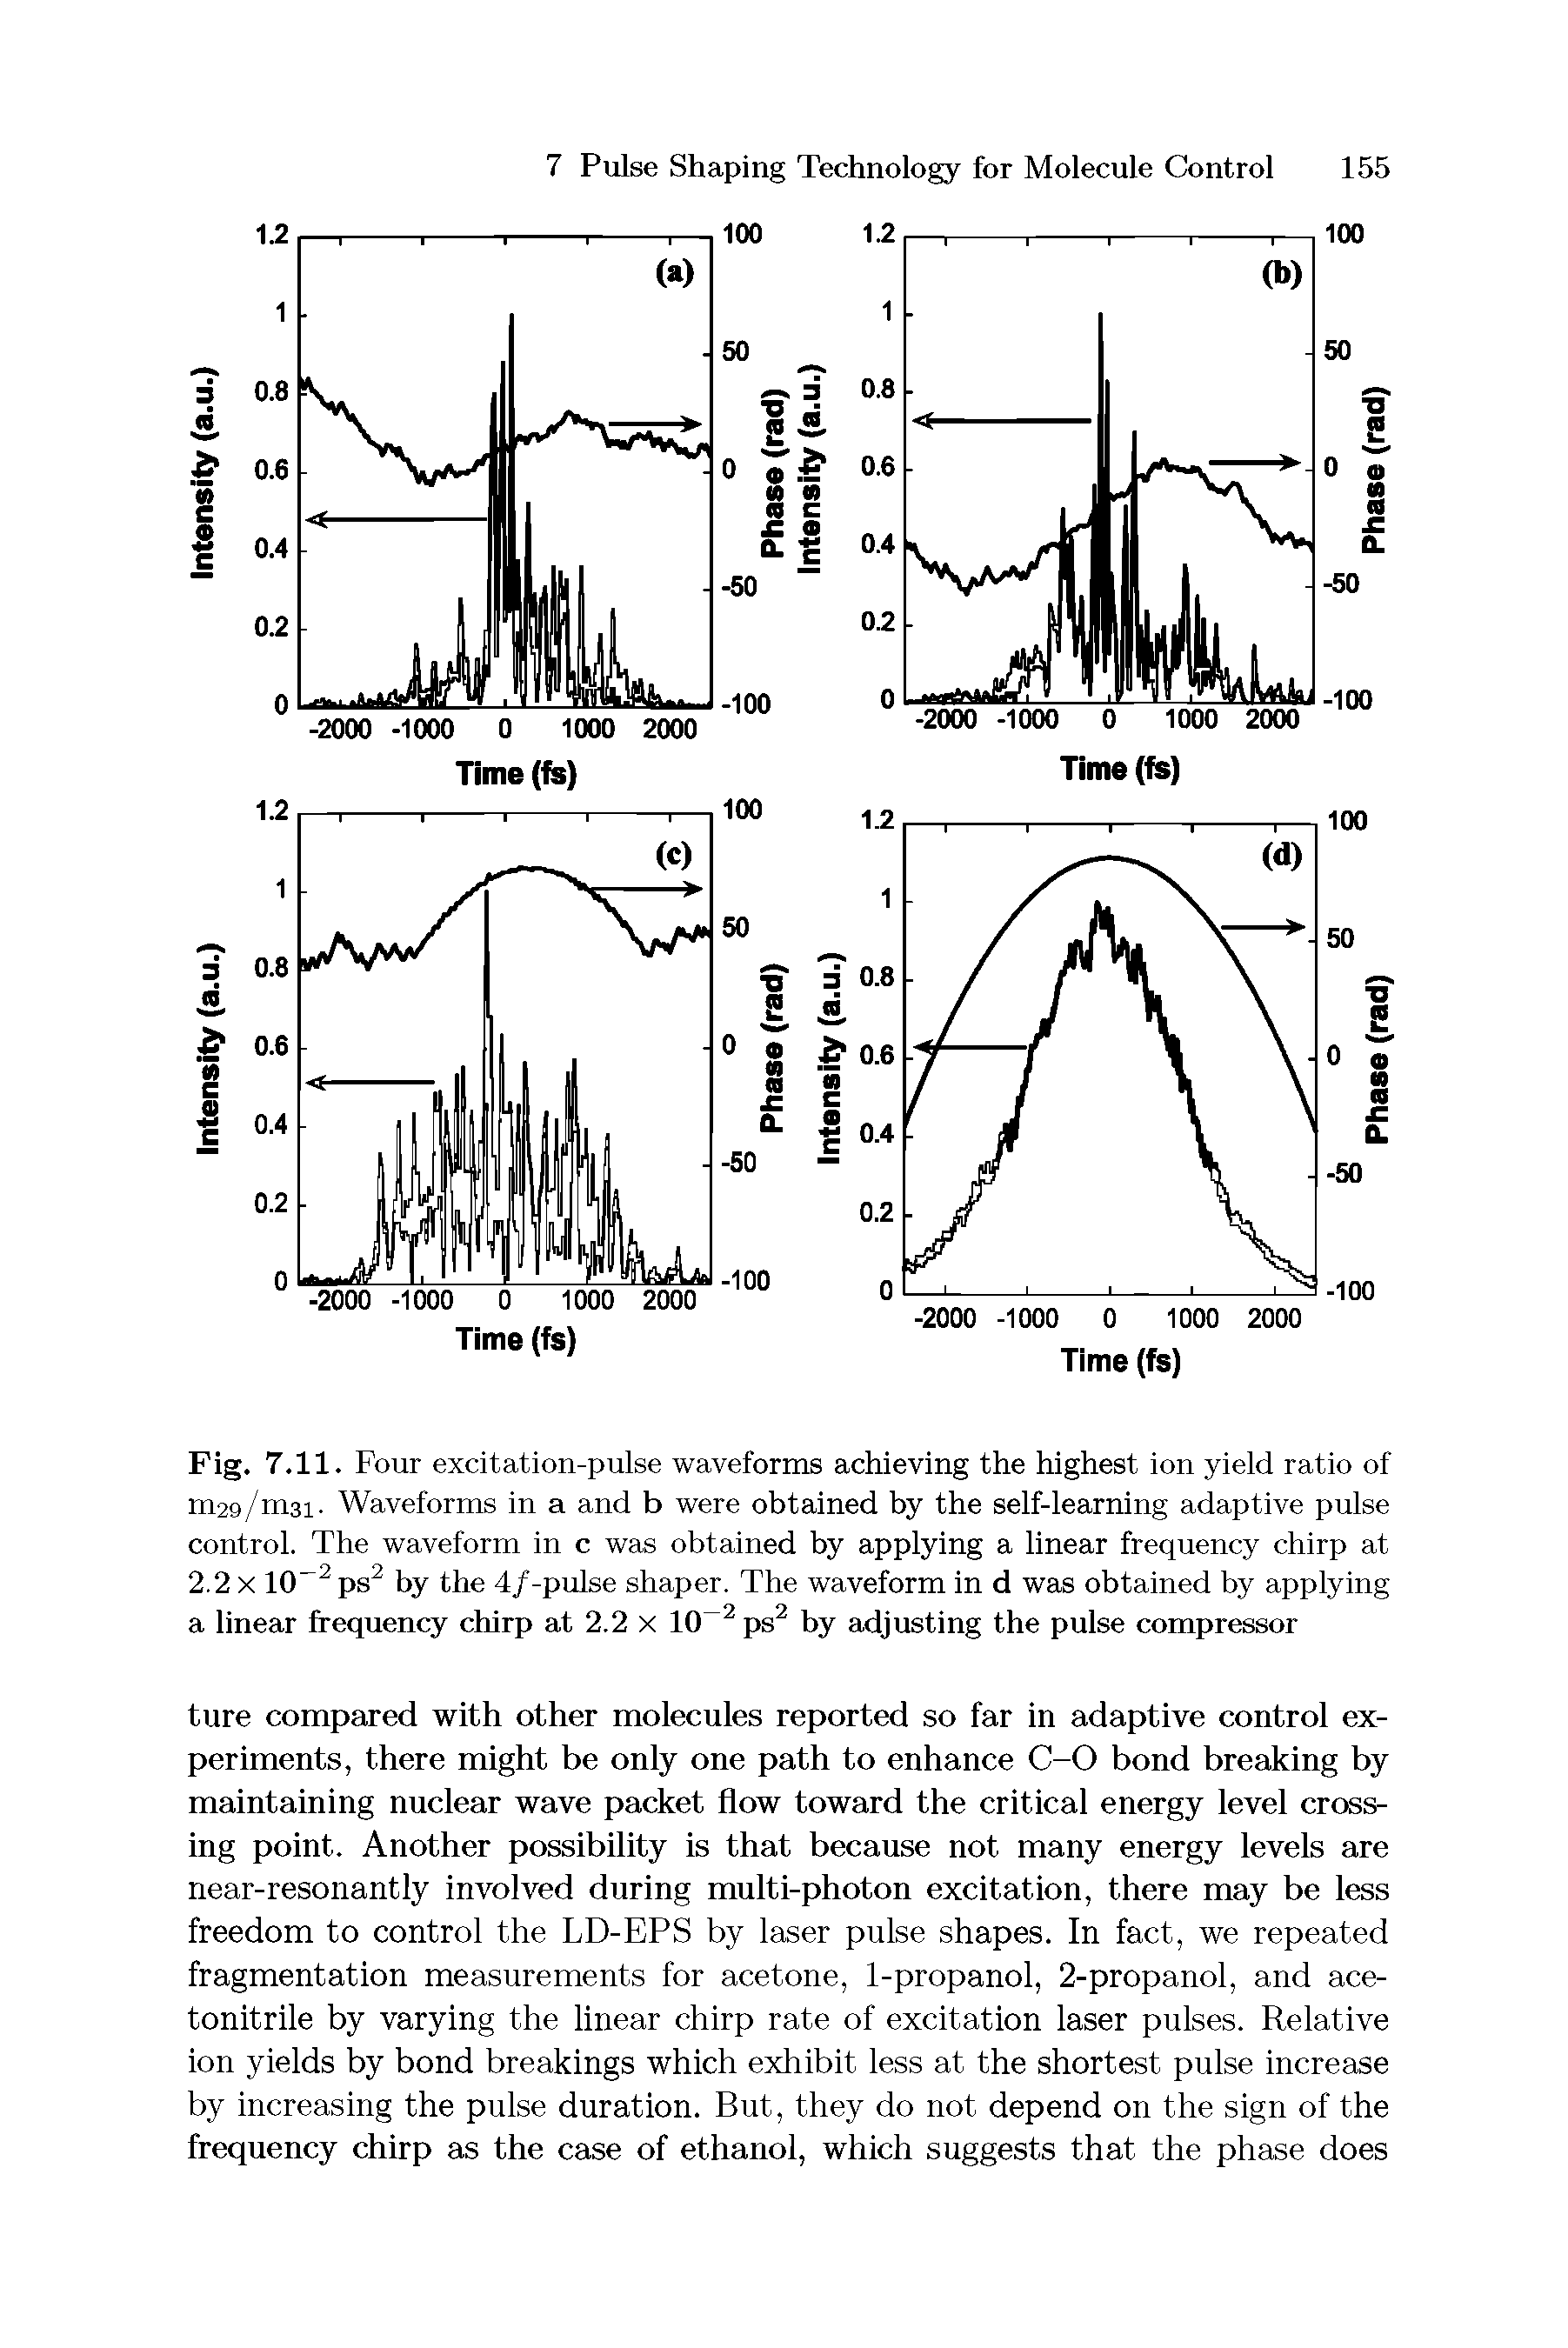 Fig. 7.11. Four excitation-pulse waveforms achieving the highest ion yield ratio of ni29/m3i. Waveforms in a and b were obtained by the self-learning adaptive pulse control. The waveform in c was obtained by applying a linear frequency chirp at 2.2 x 10 2 ps2 by the 4/-pulse shaper. The waveform in d was obtained by applying a linear frequency chirp at 2.2 x 10 2 ps2 by adjusting the pulse compressor...